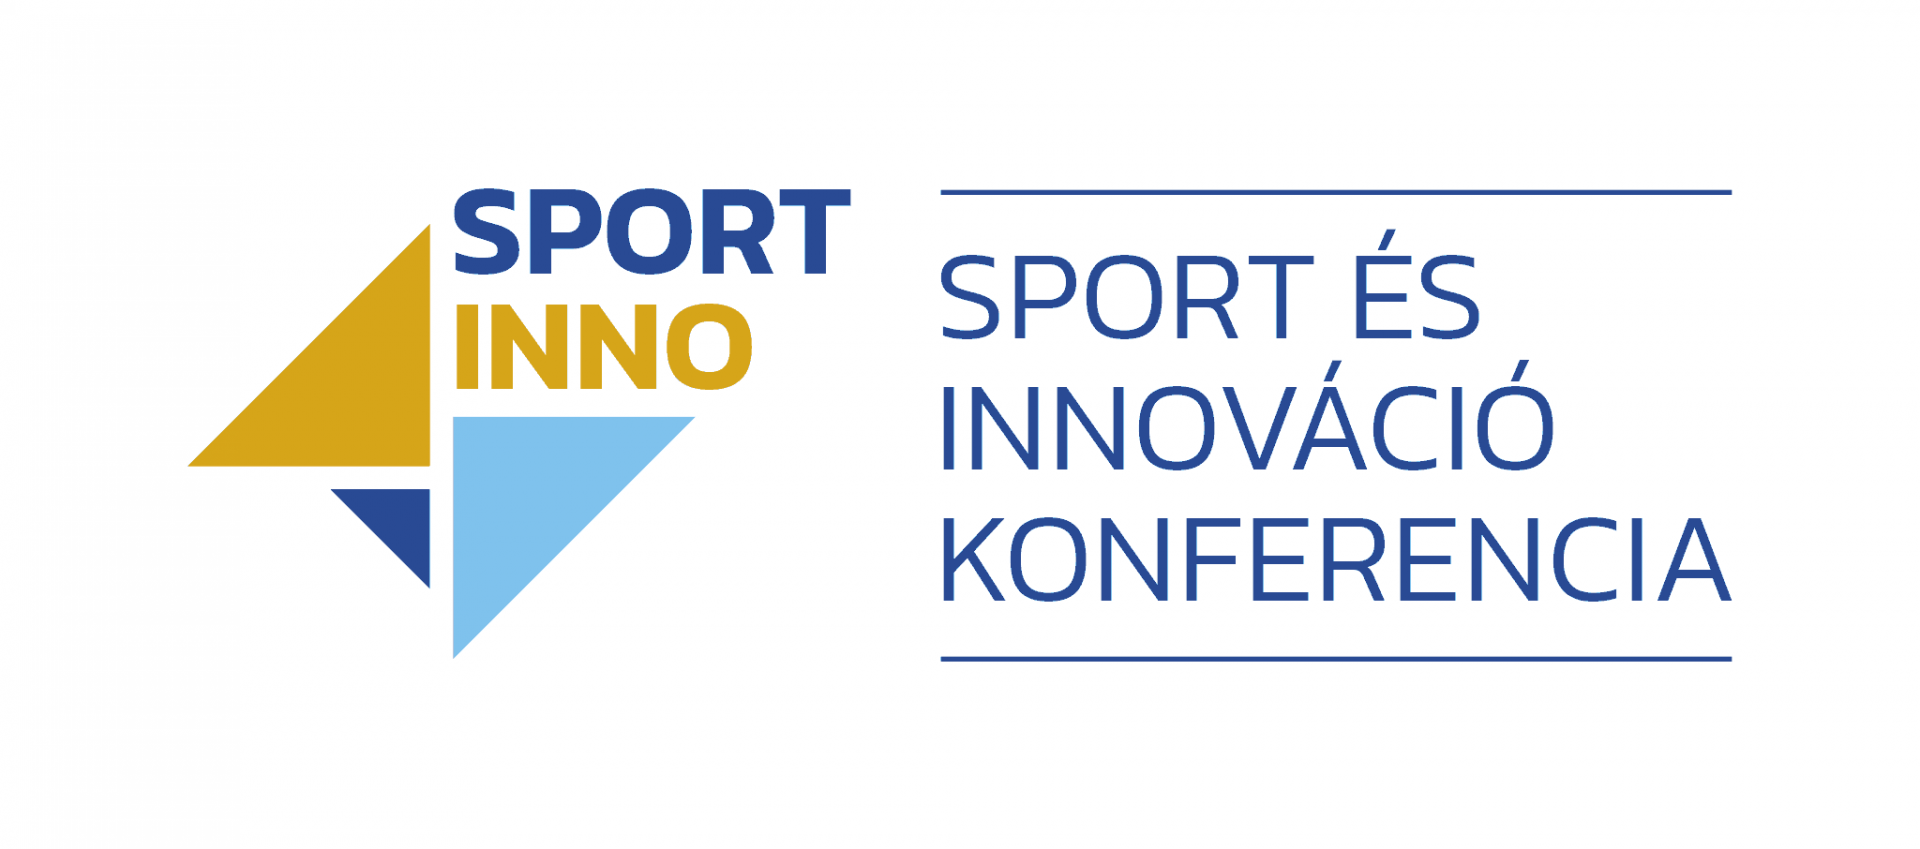 Record number of exhibitors at the 5th Sport and Innovation Conference